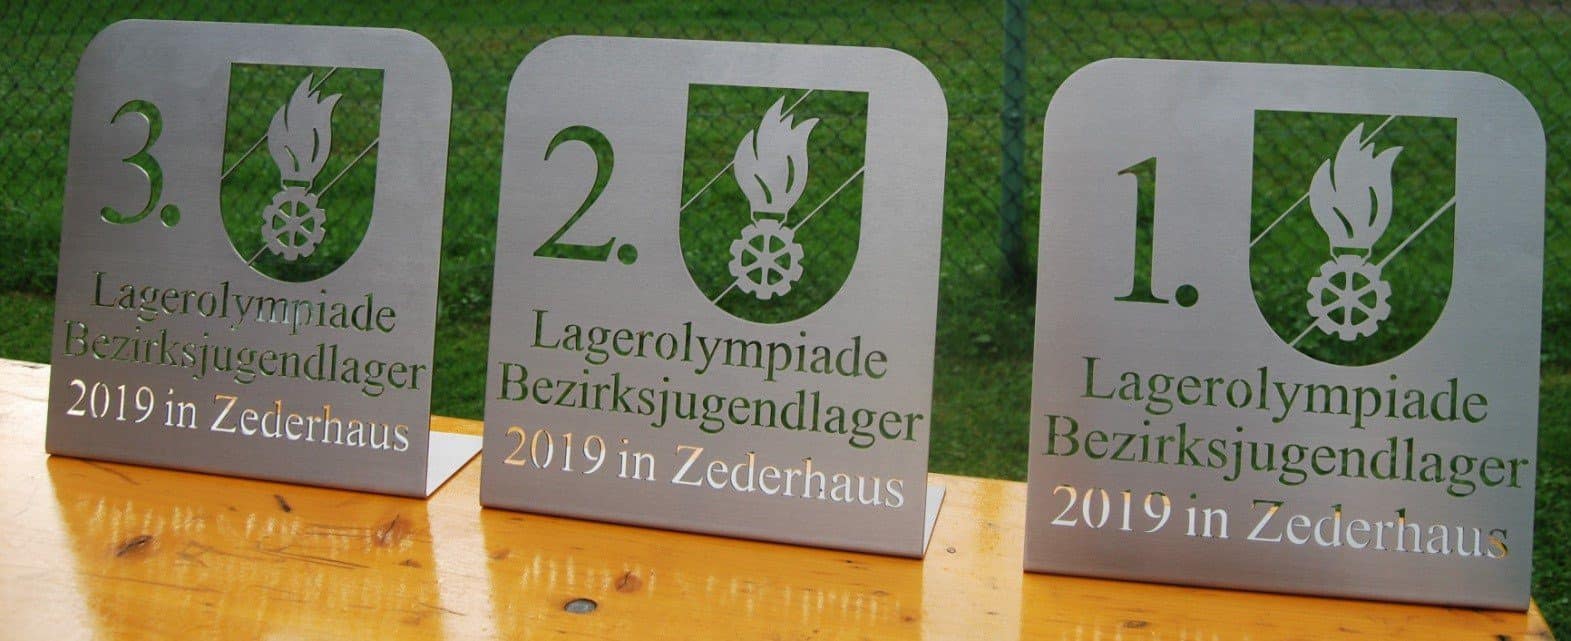 Lagerolympiade8